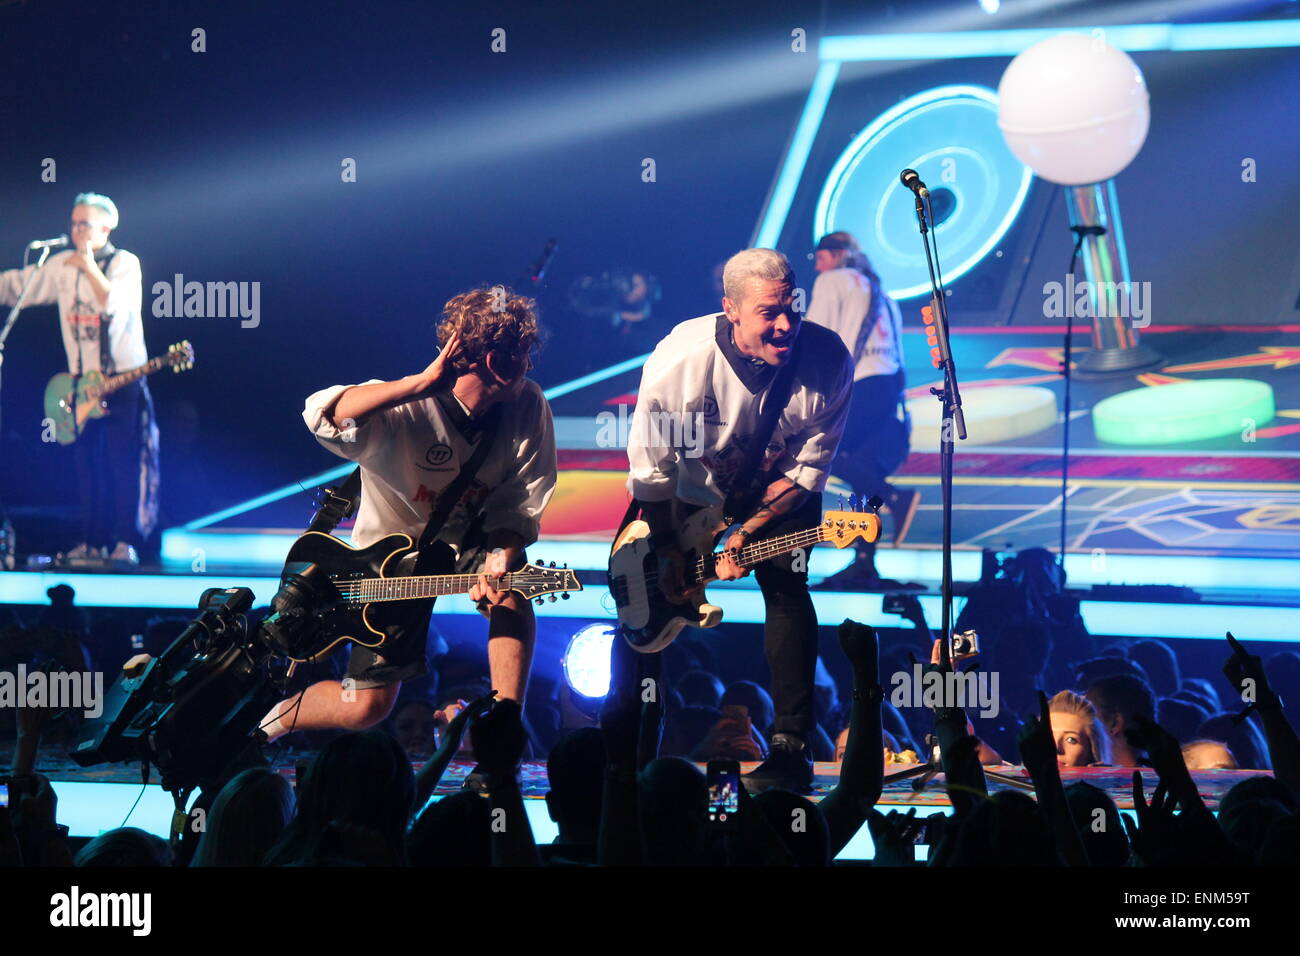 McBusted tour March 2015- O2 arena performance. ‘Most Excellent Adventure Tour’ Stock Photo